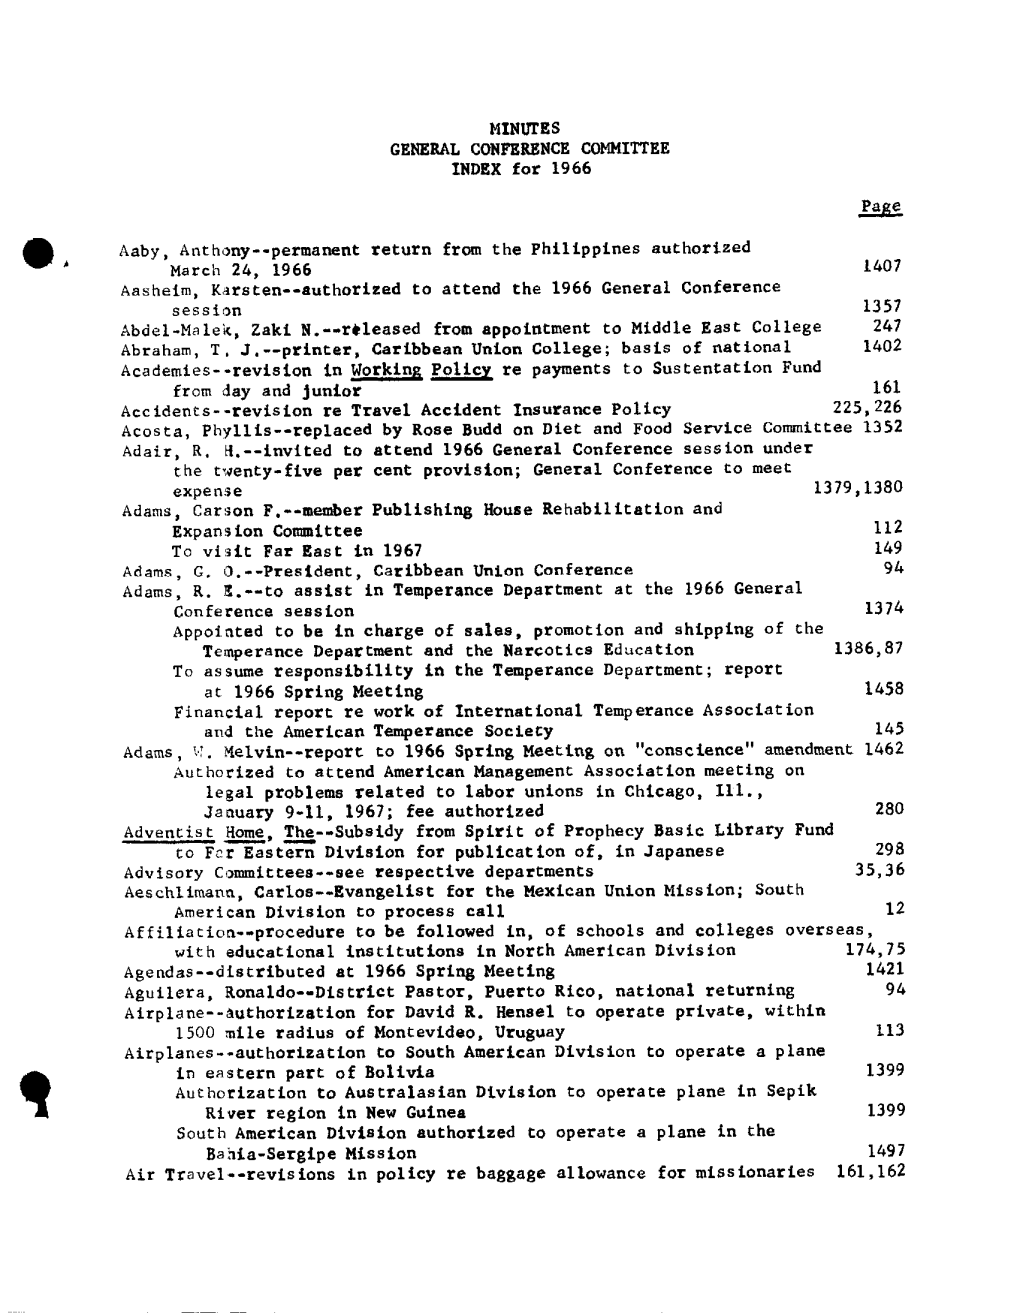 MINUTES GENERAL CONFERENCE COMMITTEE INDEX for 1966 Page Aaby, Anthony--Permanent Return from the Philippines Authorized March